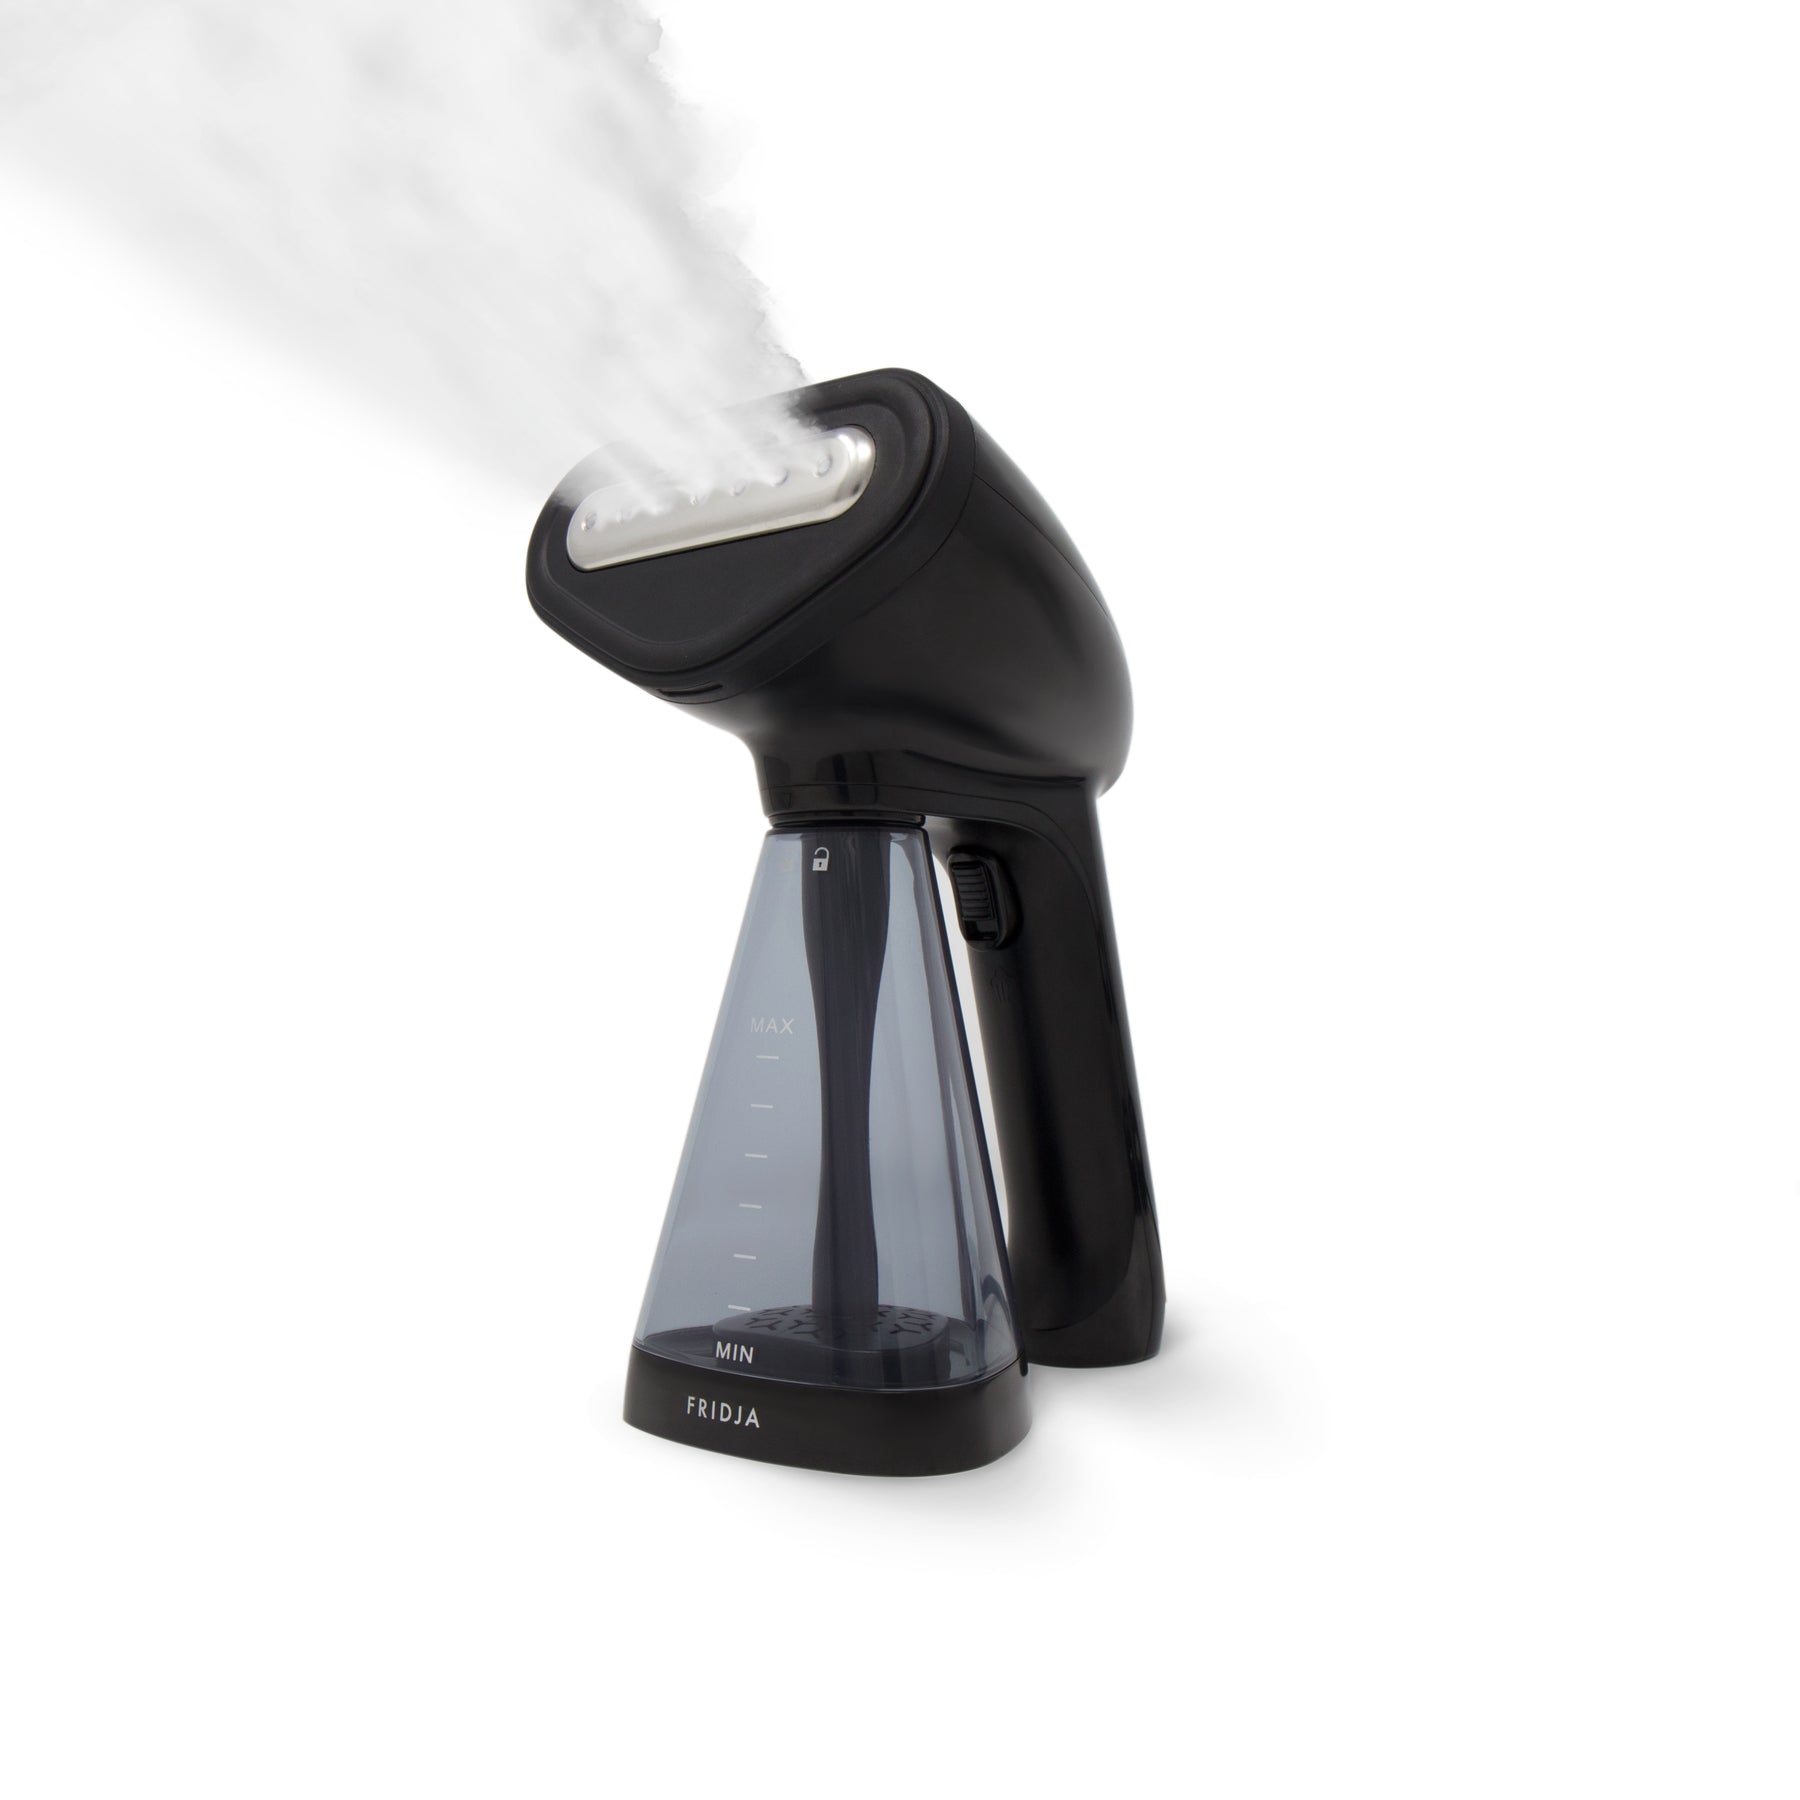 Fridja Handheld steamer in black with plume of steam coming from the front